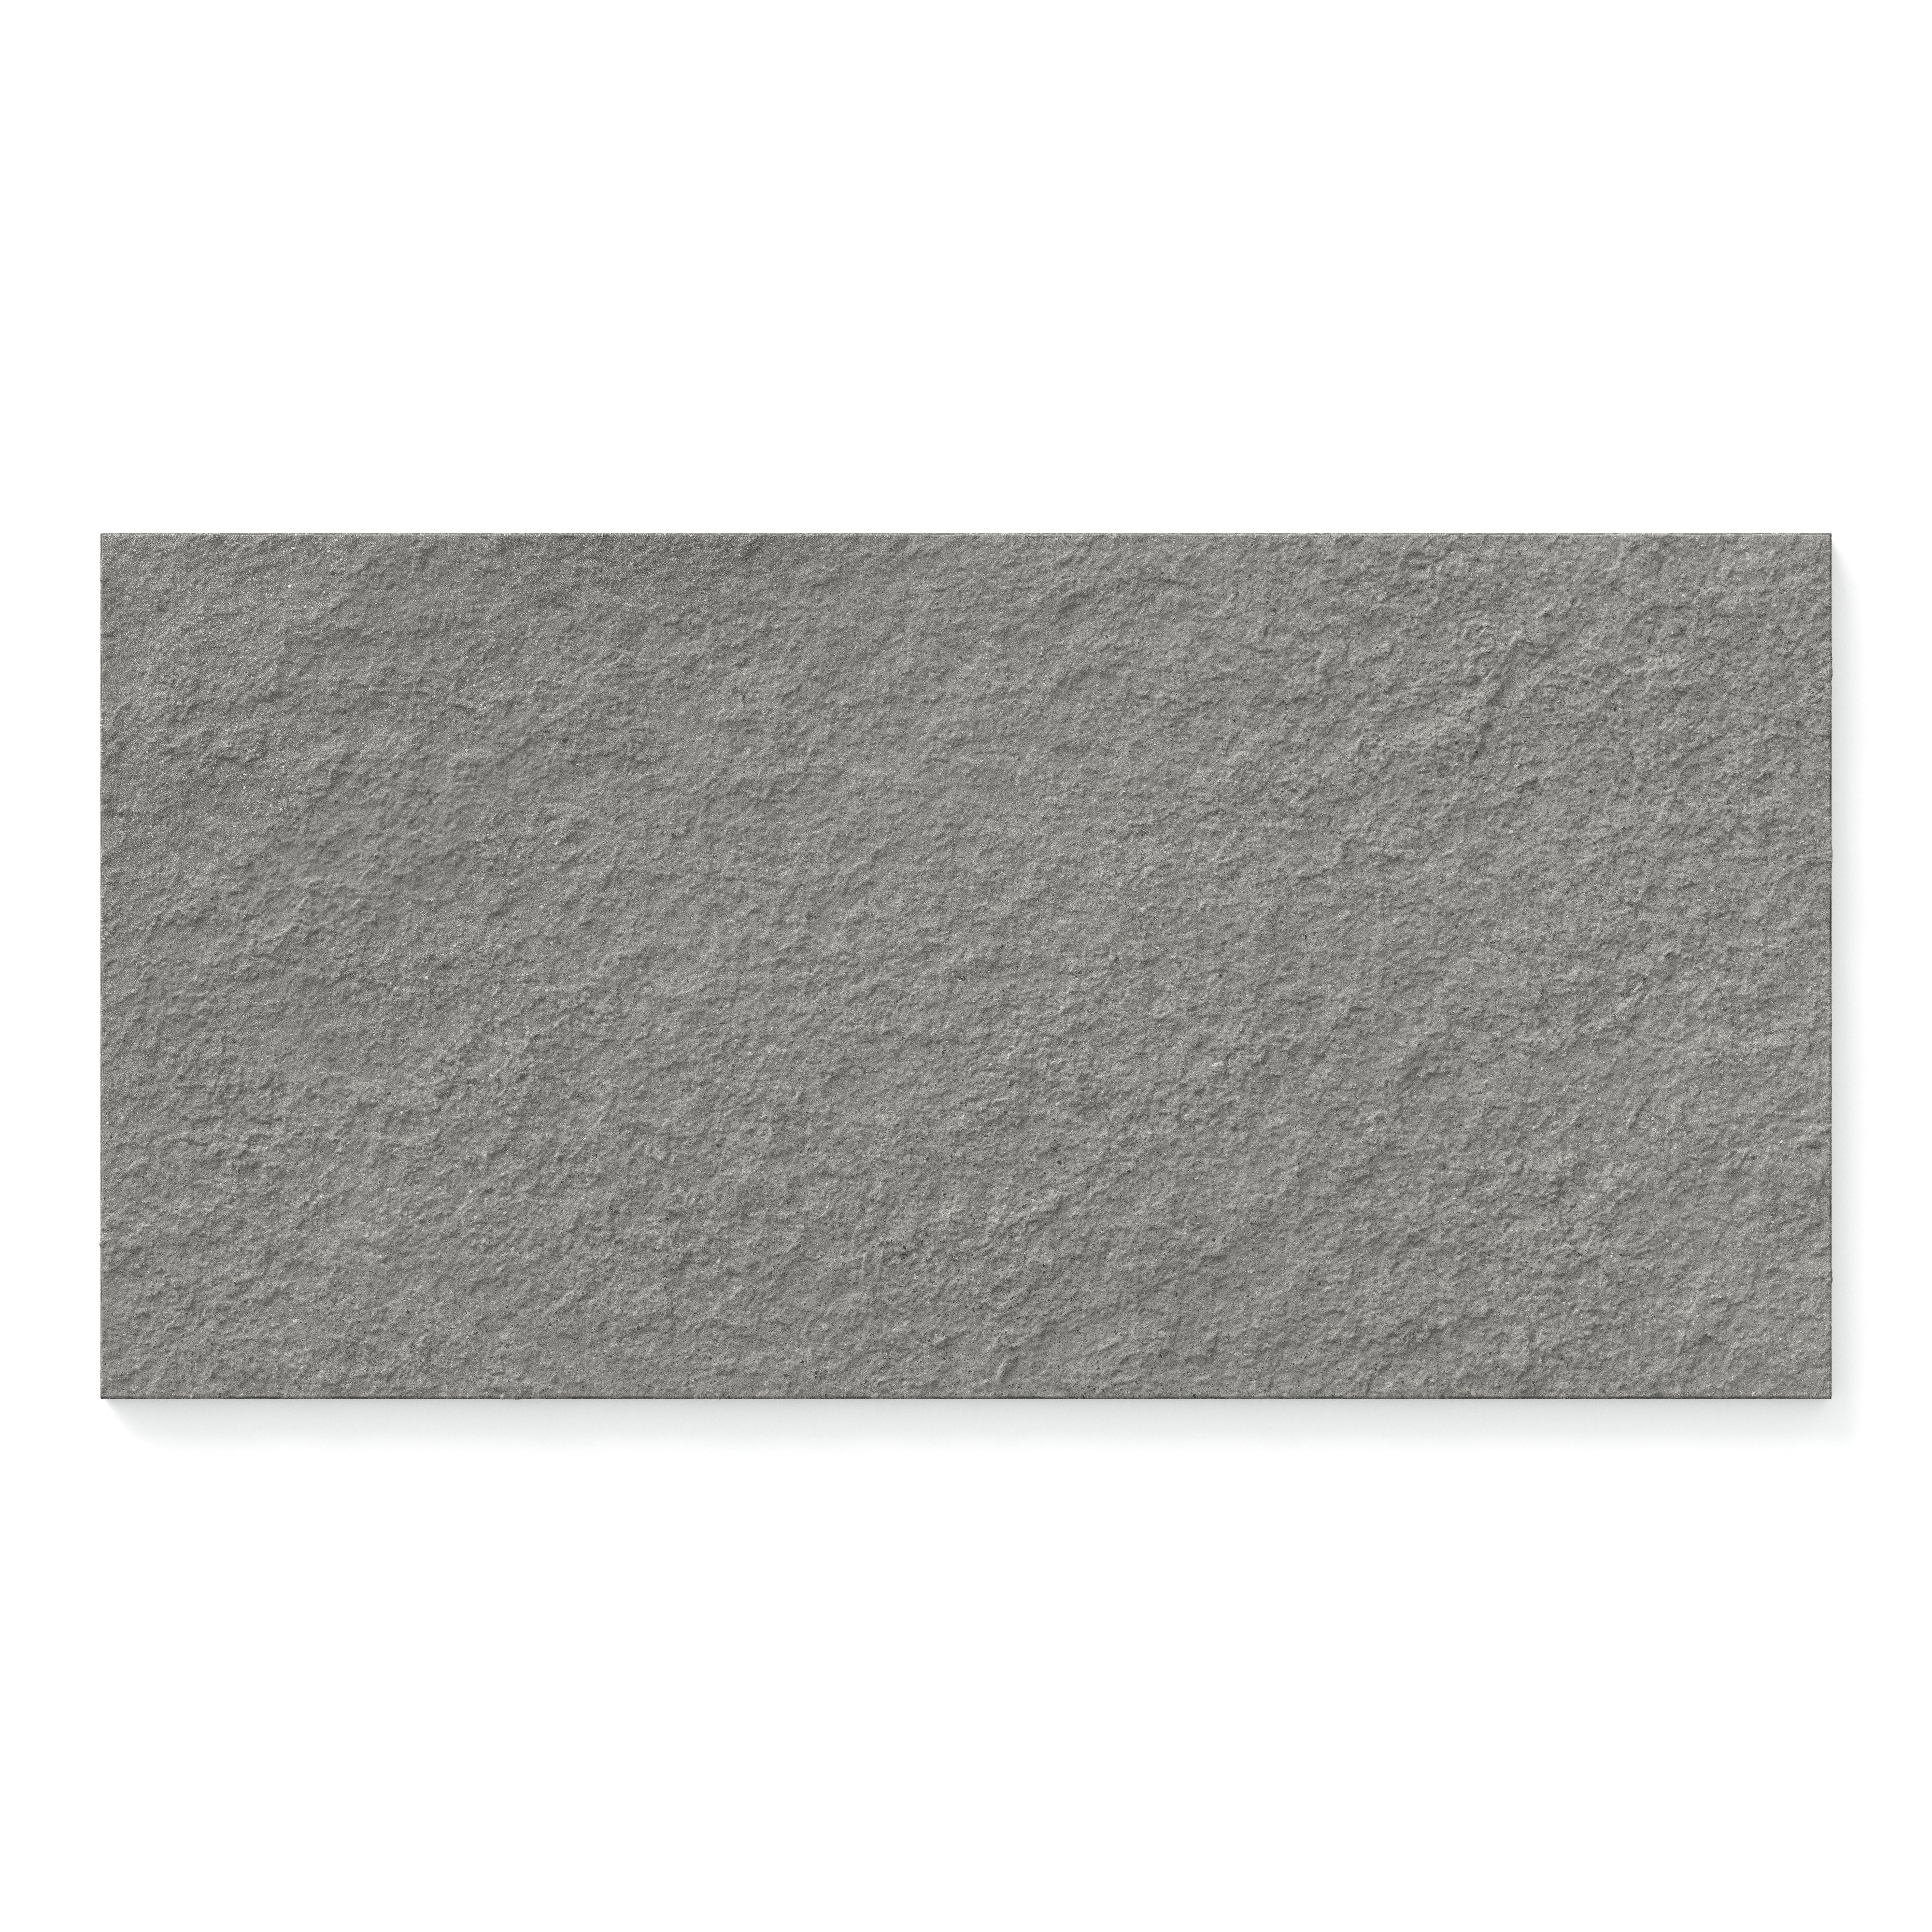 Palmer 12x24 Raw Porcelain Tile in Charcoal